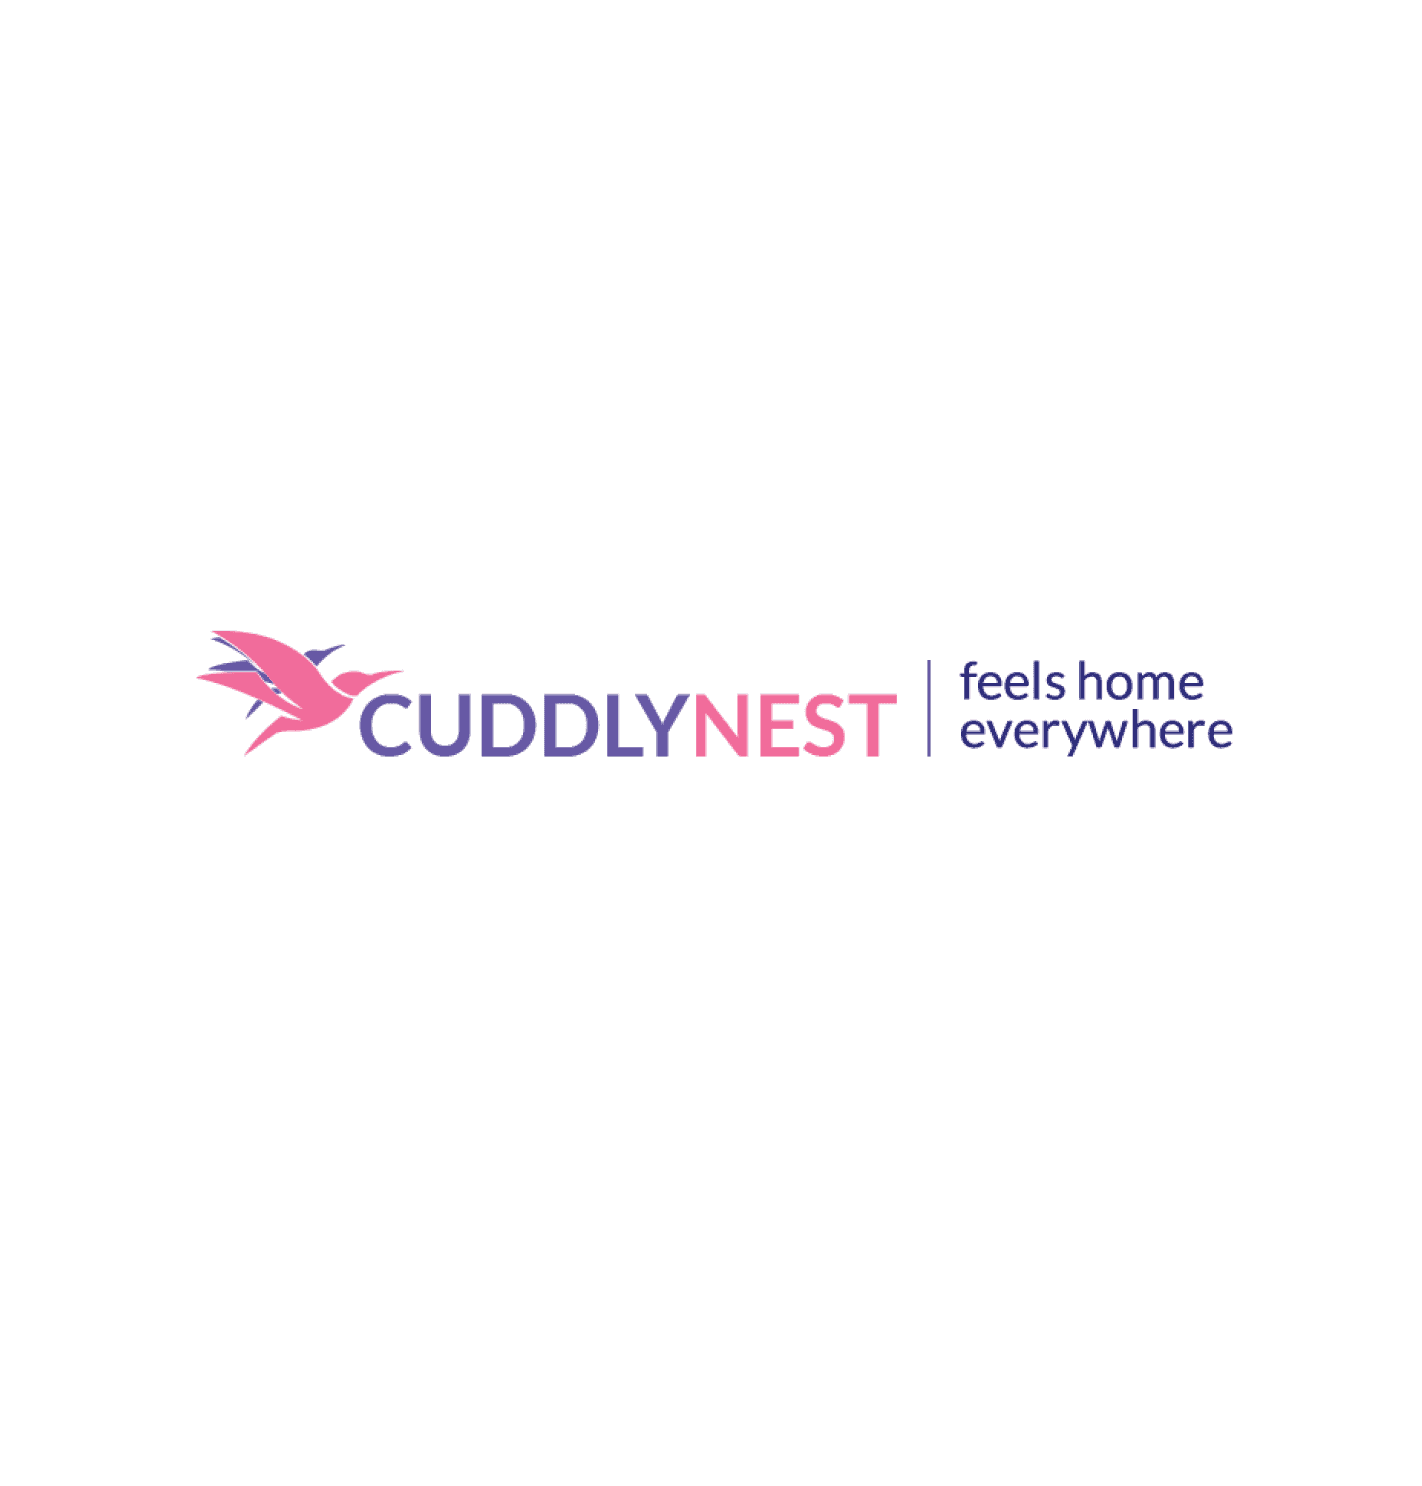 An image of the old cuddlynest logotype